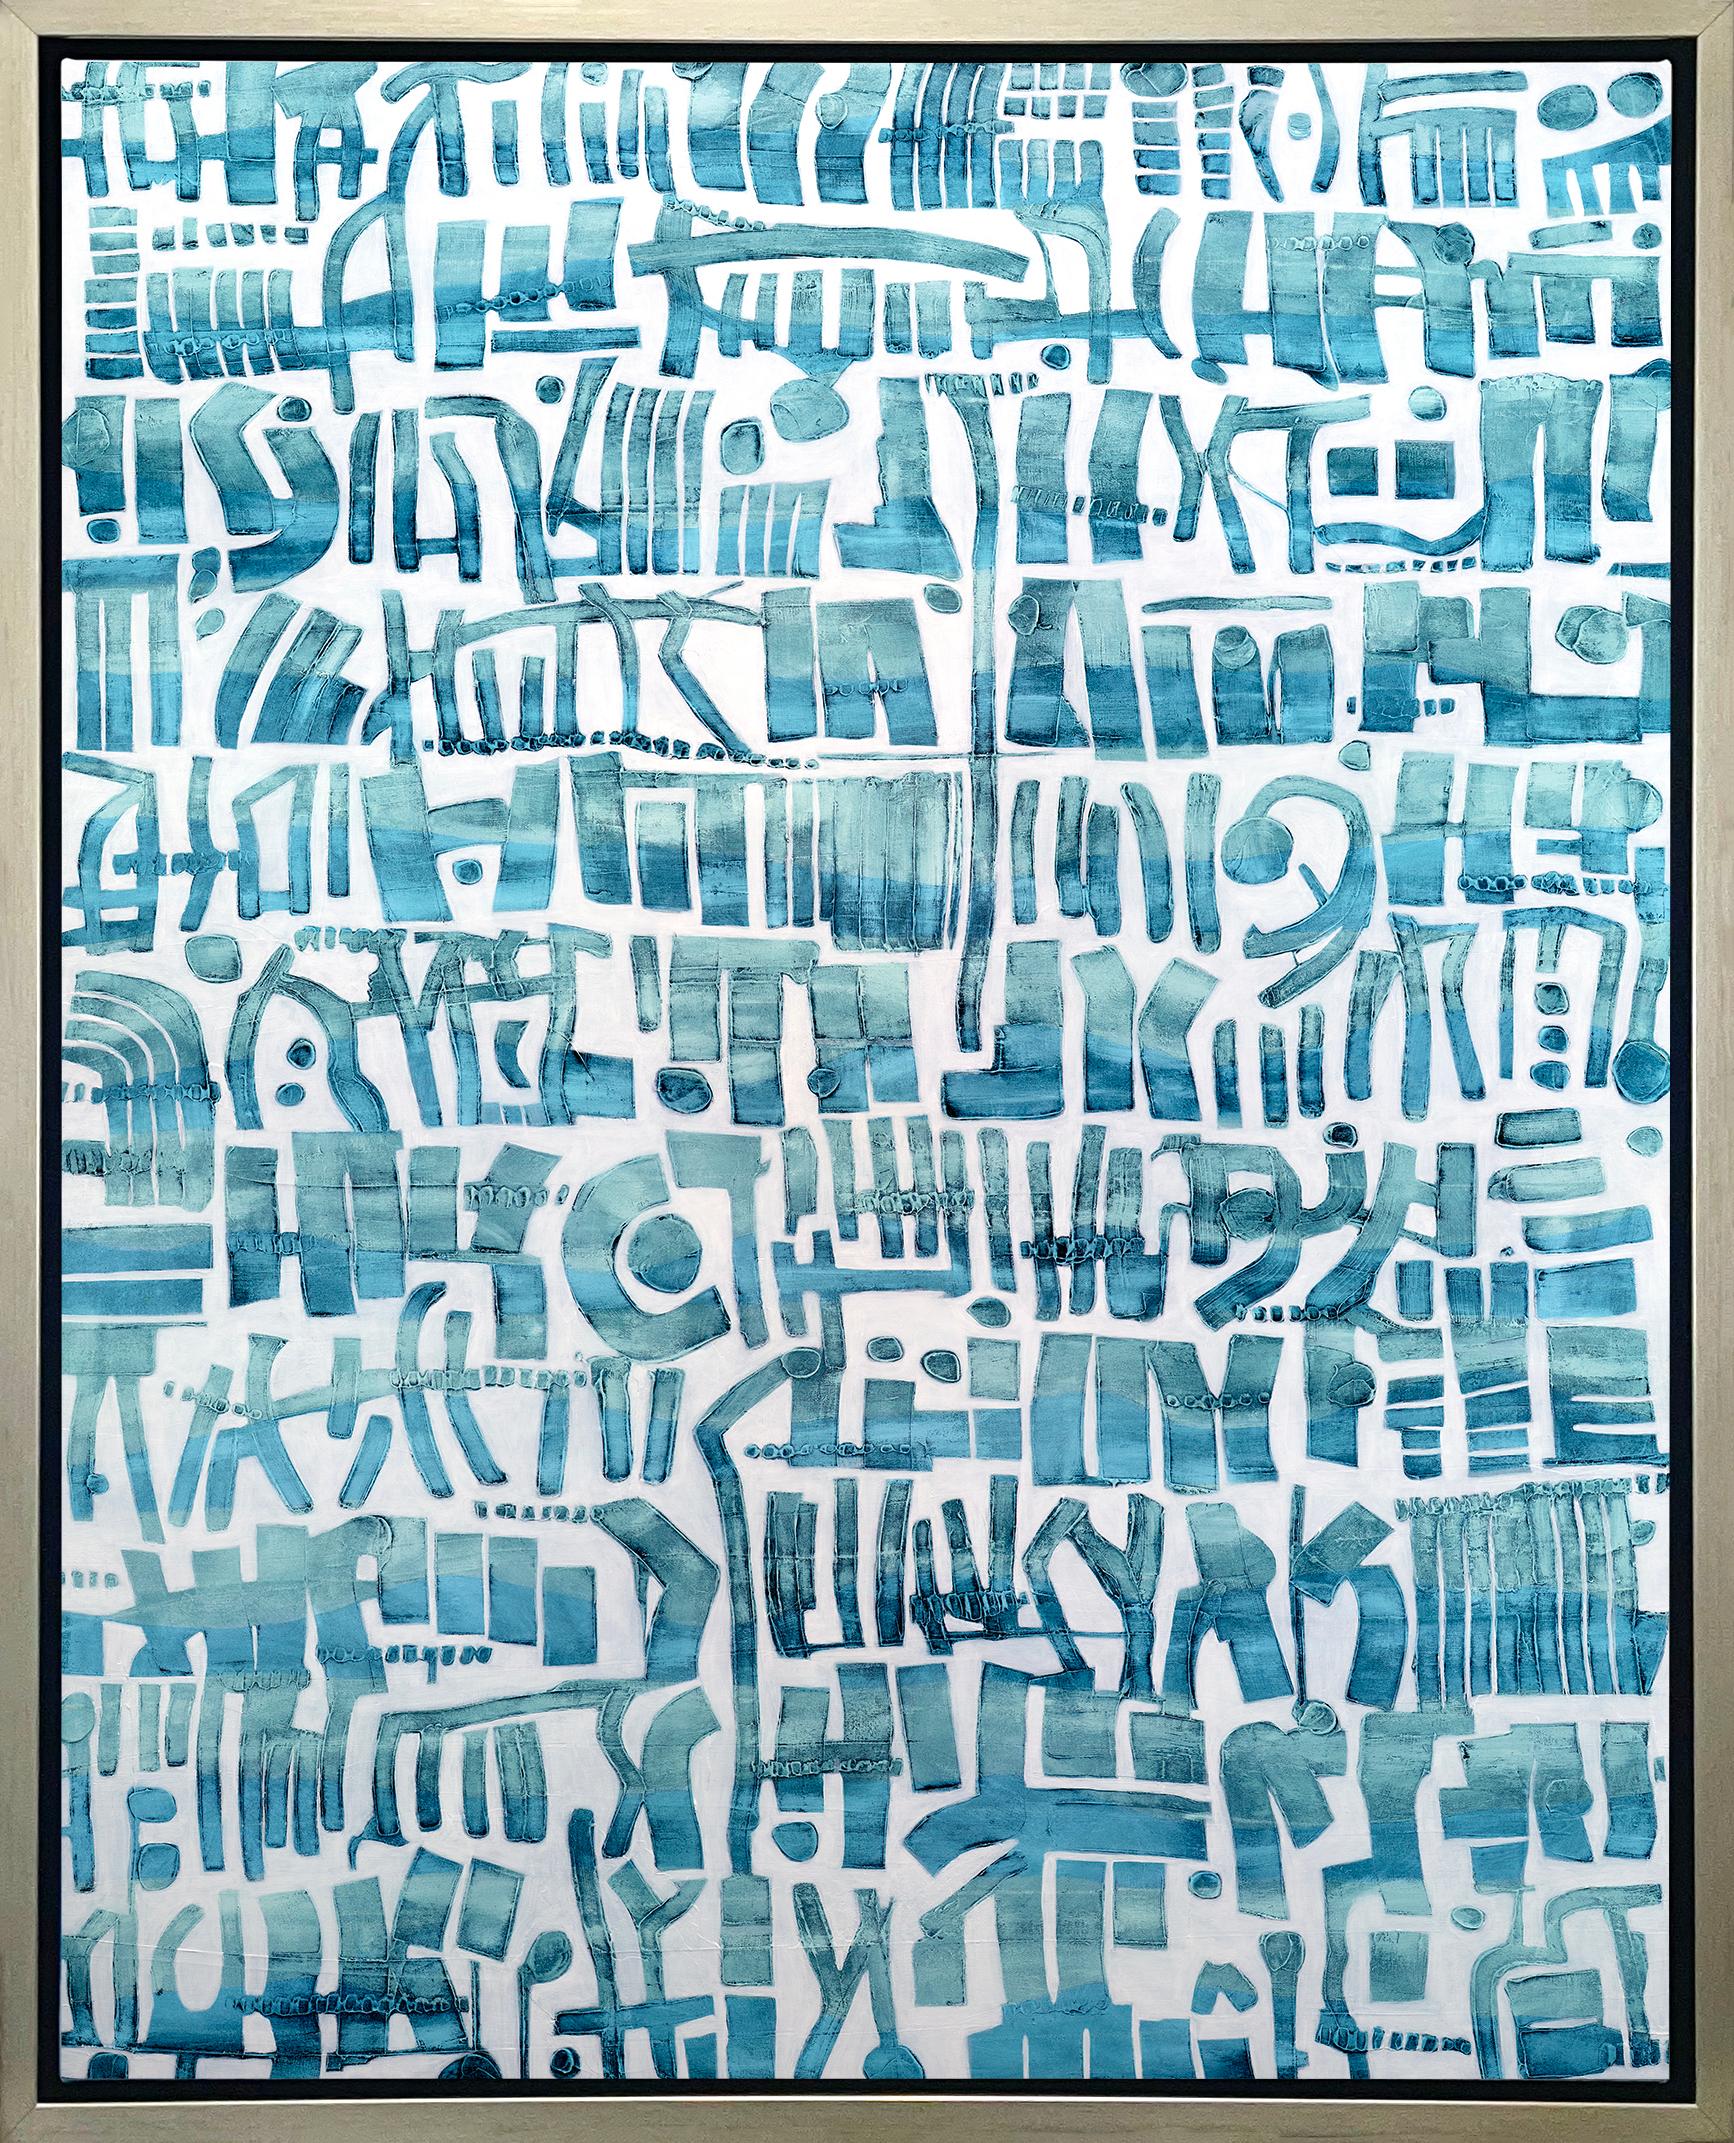 Sofie Swann Abstract Print - "Message in a Bottle, " Framed Limited Edition Giclee Print, 50" x 40"